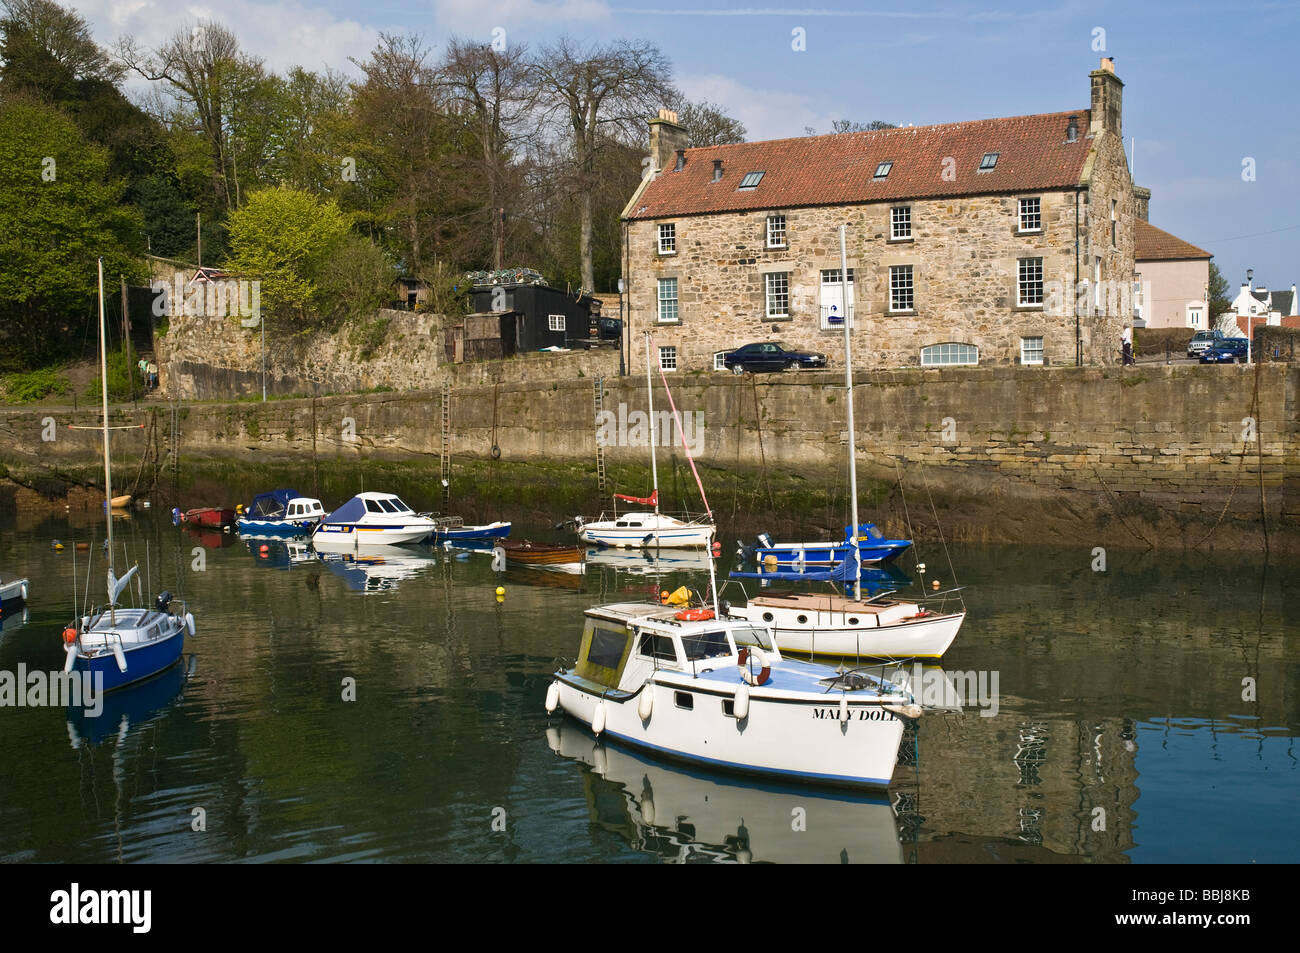 dh Harbourmasters house DYSART FIFE Scottish harbor Yachts in harbours harbourmaster harbour scotland Stock Photo